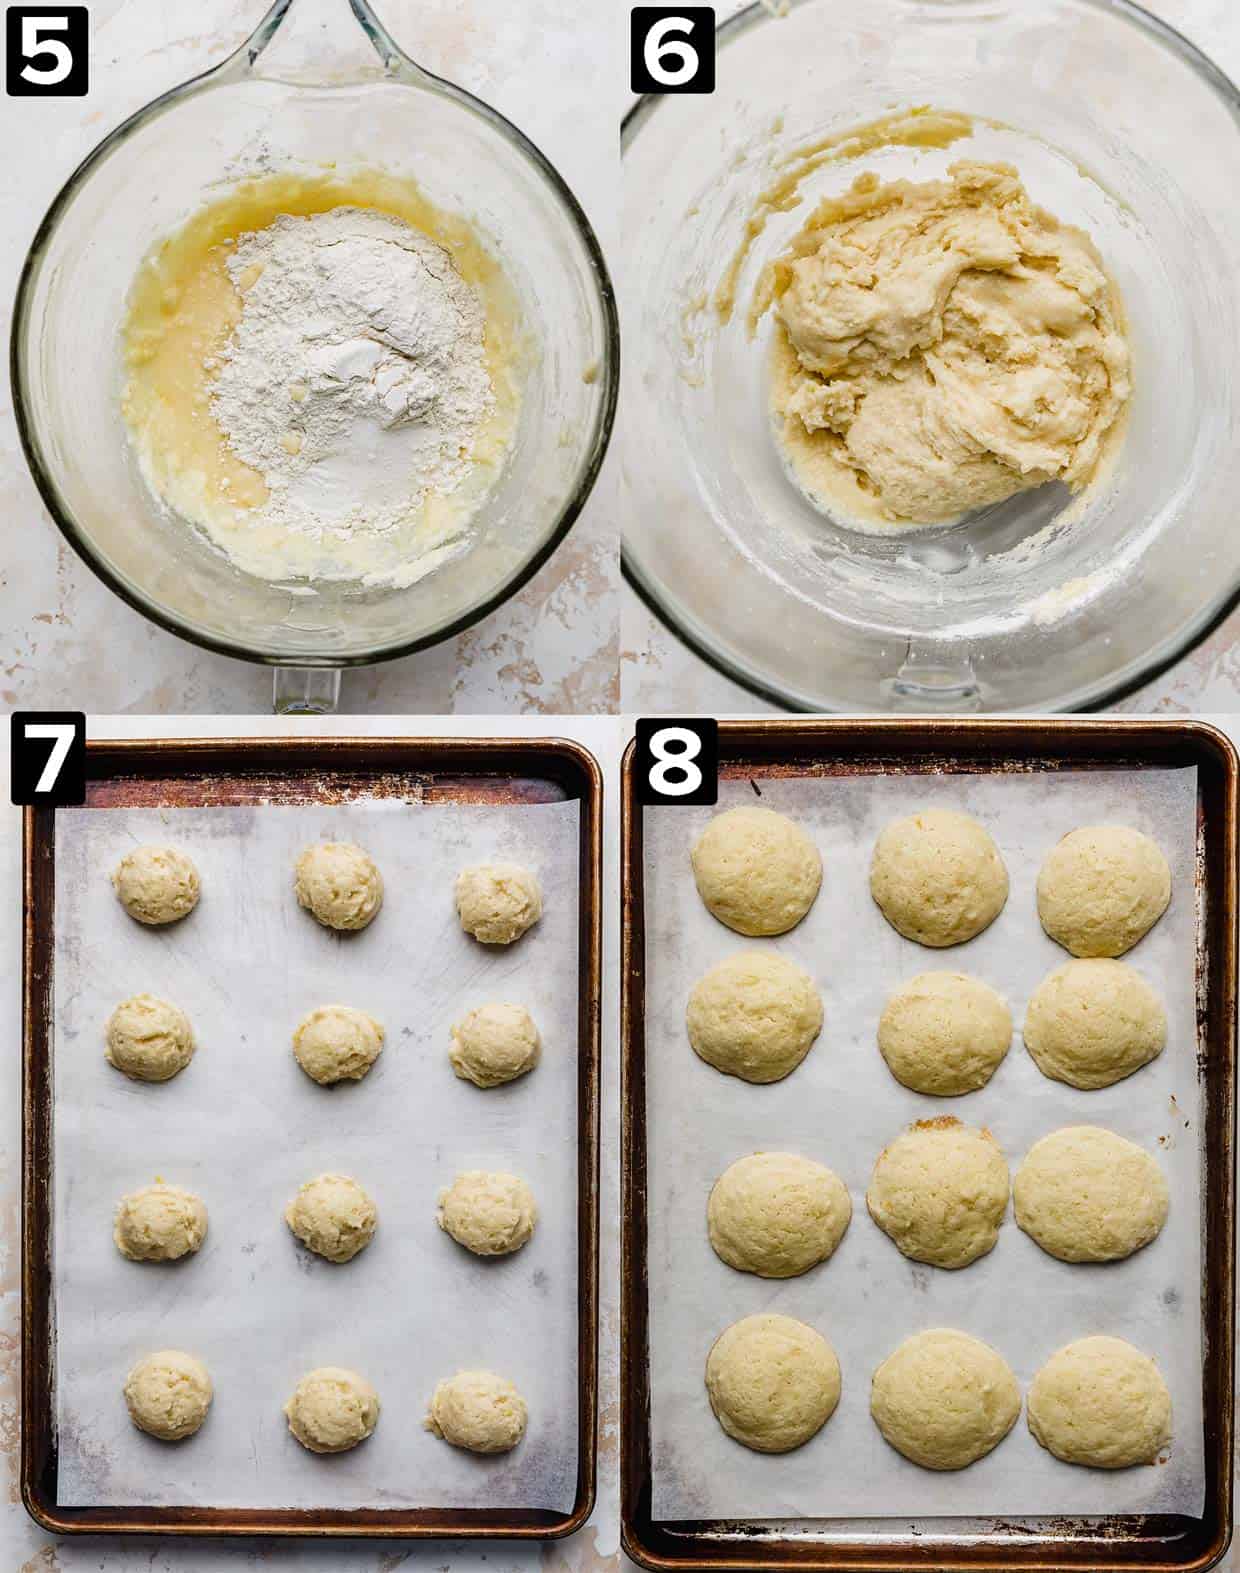 Four photos showing the end process of making Lemon Ricotta Cookies, the dough in a bowl and then portioned in balls on a baking sheet, and then baked cookies.